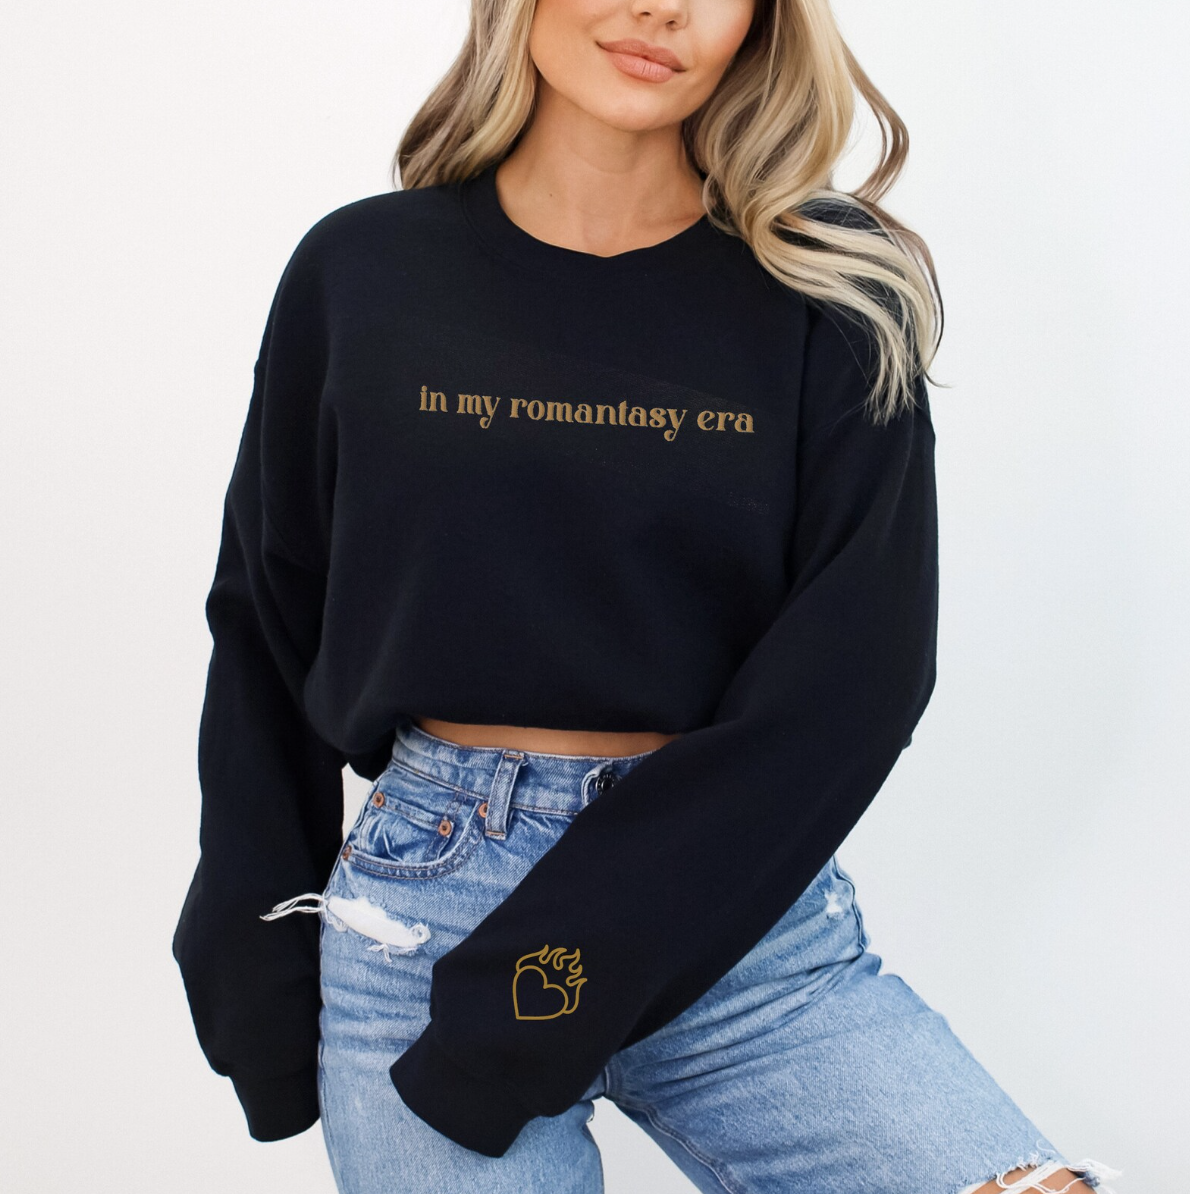 Image of the torso of someone wearing a black sweatshirt with "in my romantasy era" embroidered across the chest and a heart with flames on the sleeve